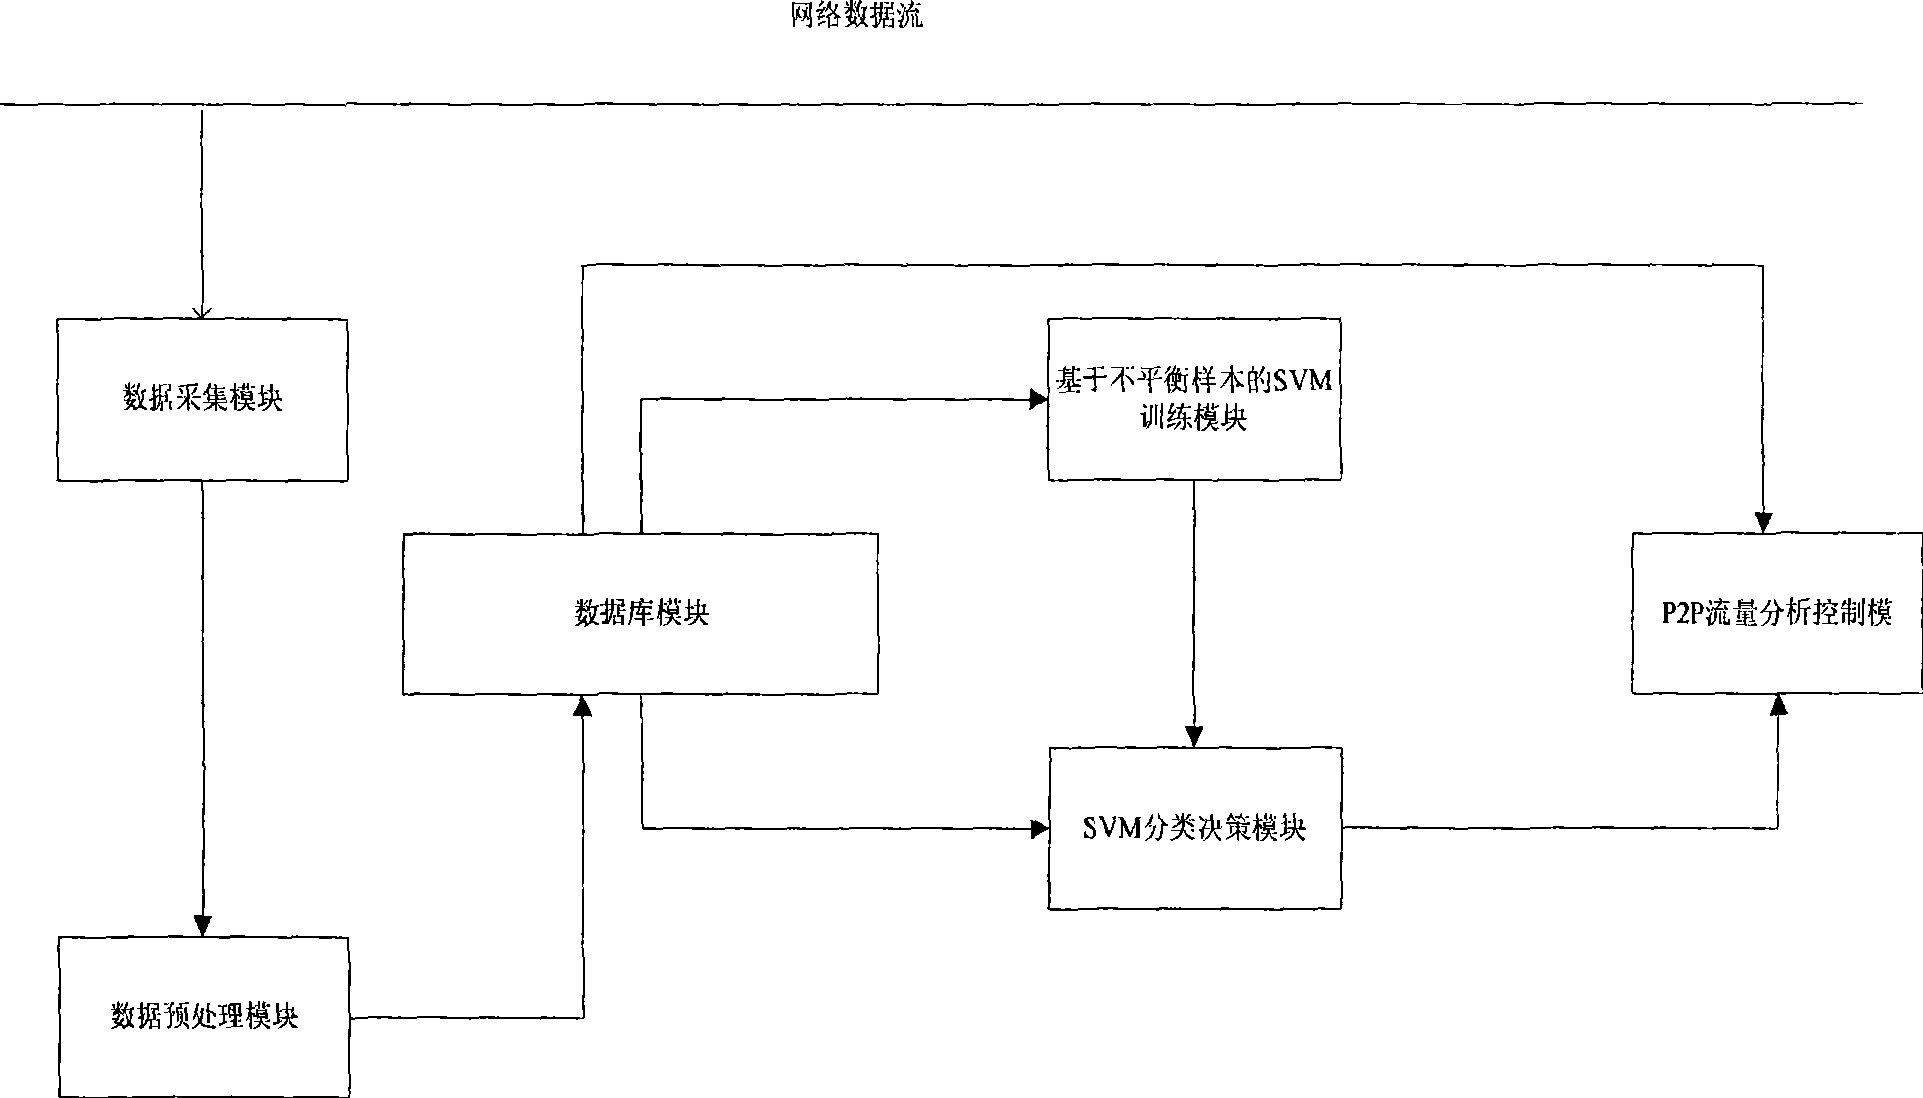 Equity network flux detection method based on supporting vector machine